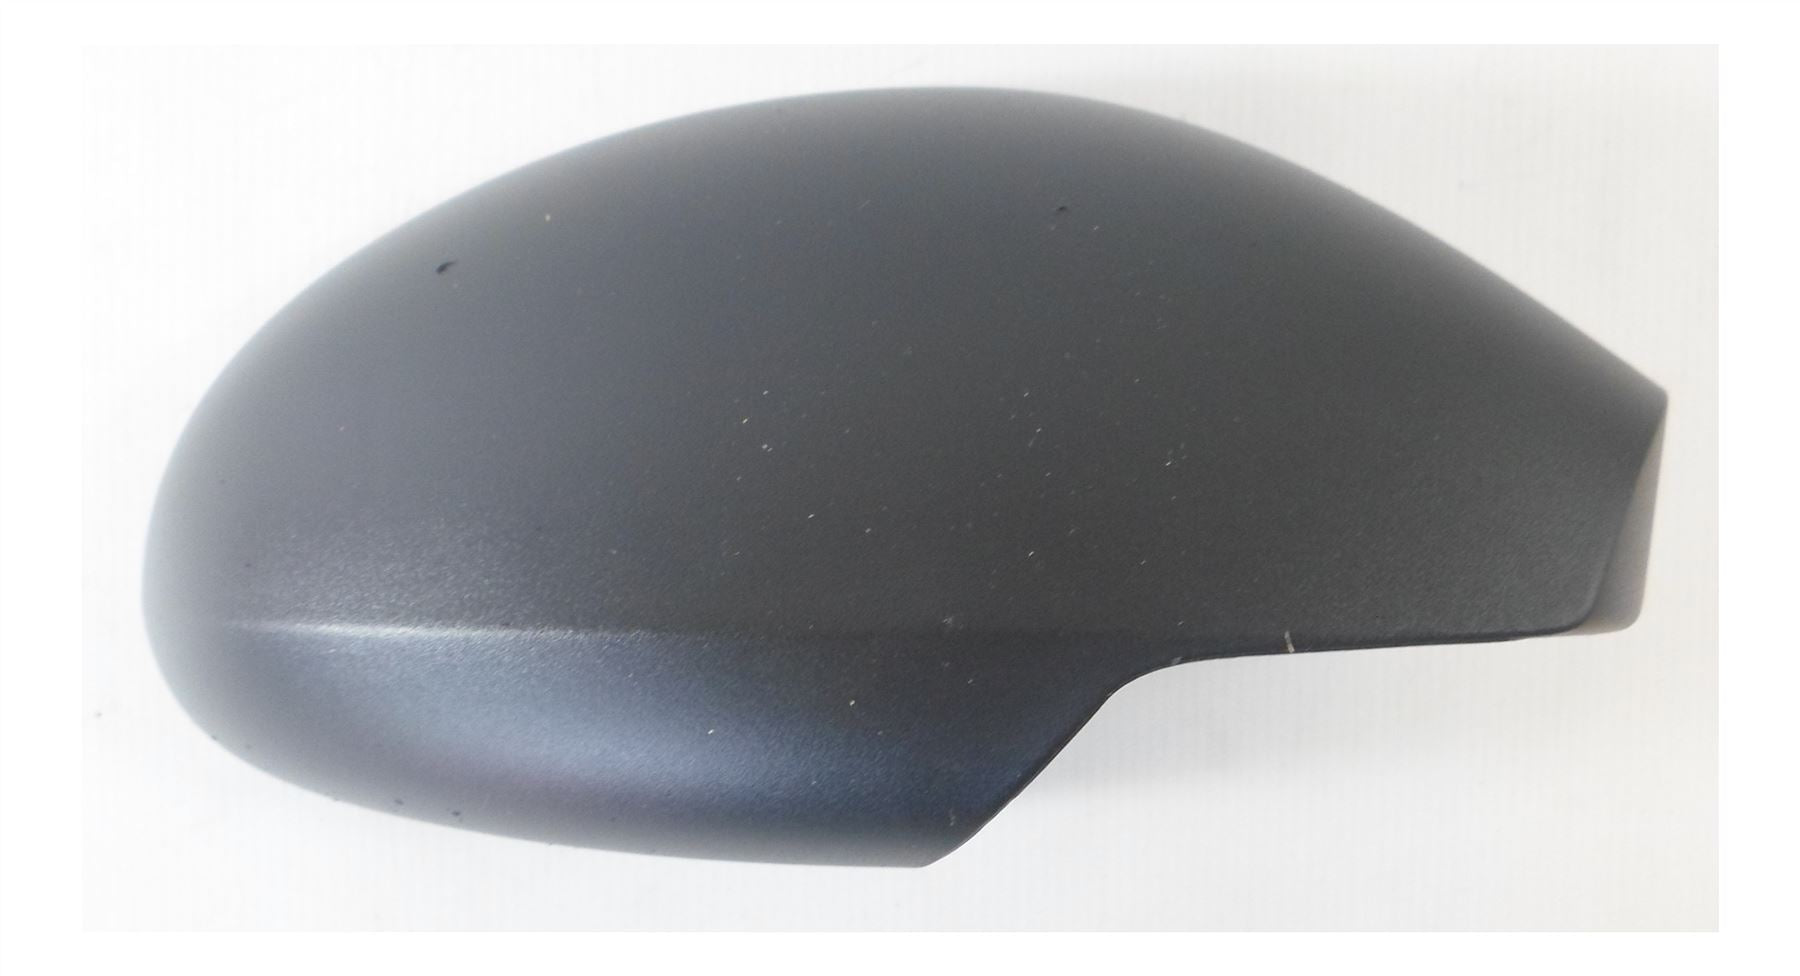 Seat Leon Mk.1 8/2003-10/2005 Black - Textured Wing Mirror Cover Driver Side O/S